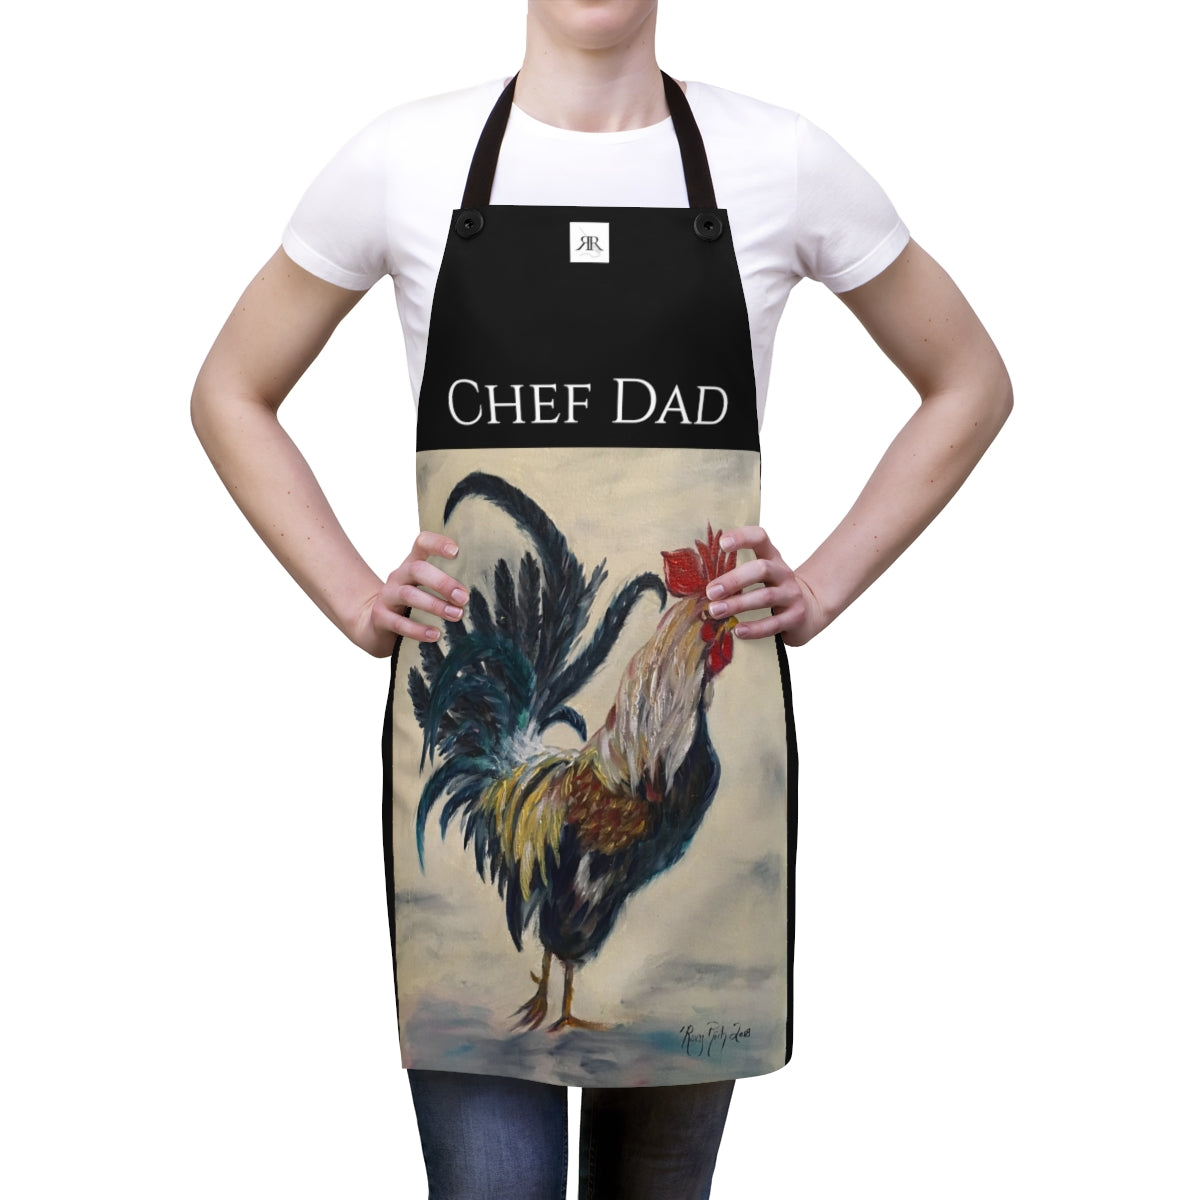 Chef Dad Original Rooster Painting  Printed on Black Apron